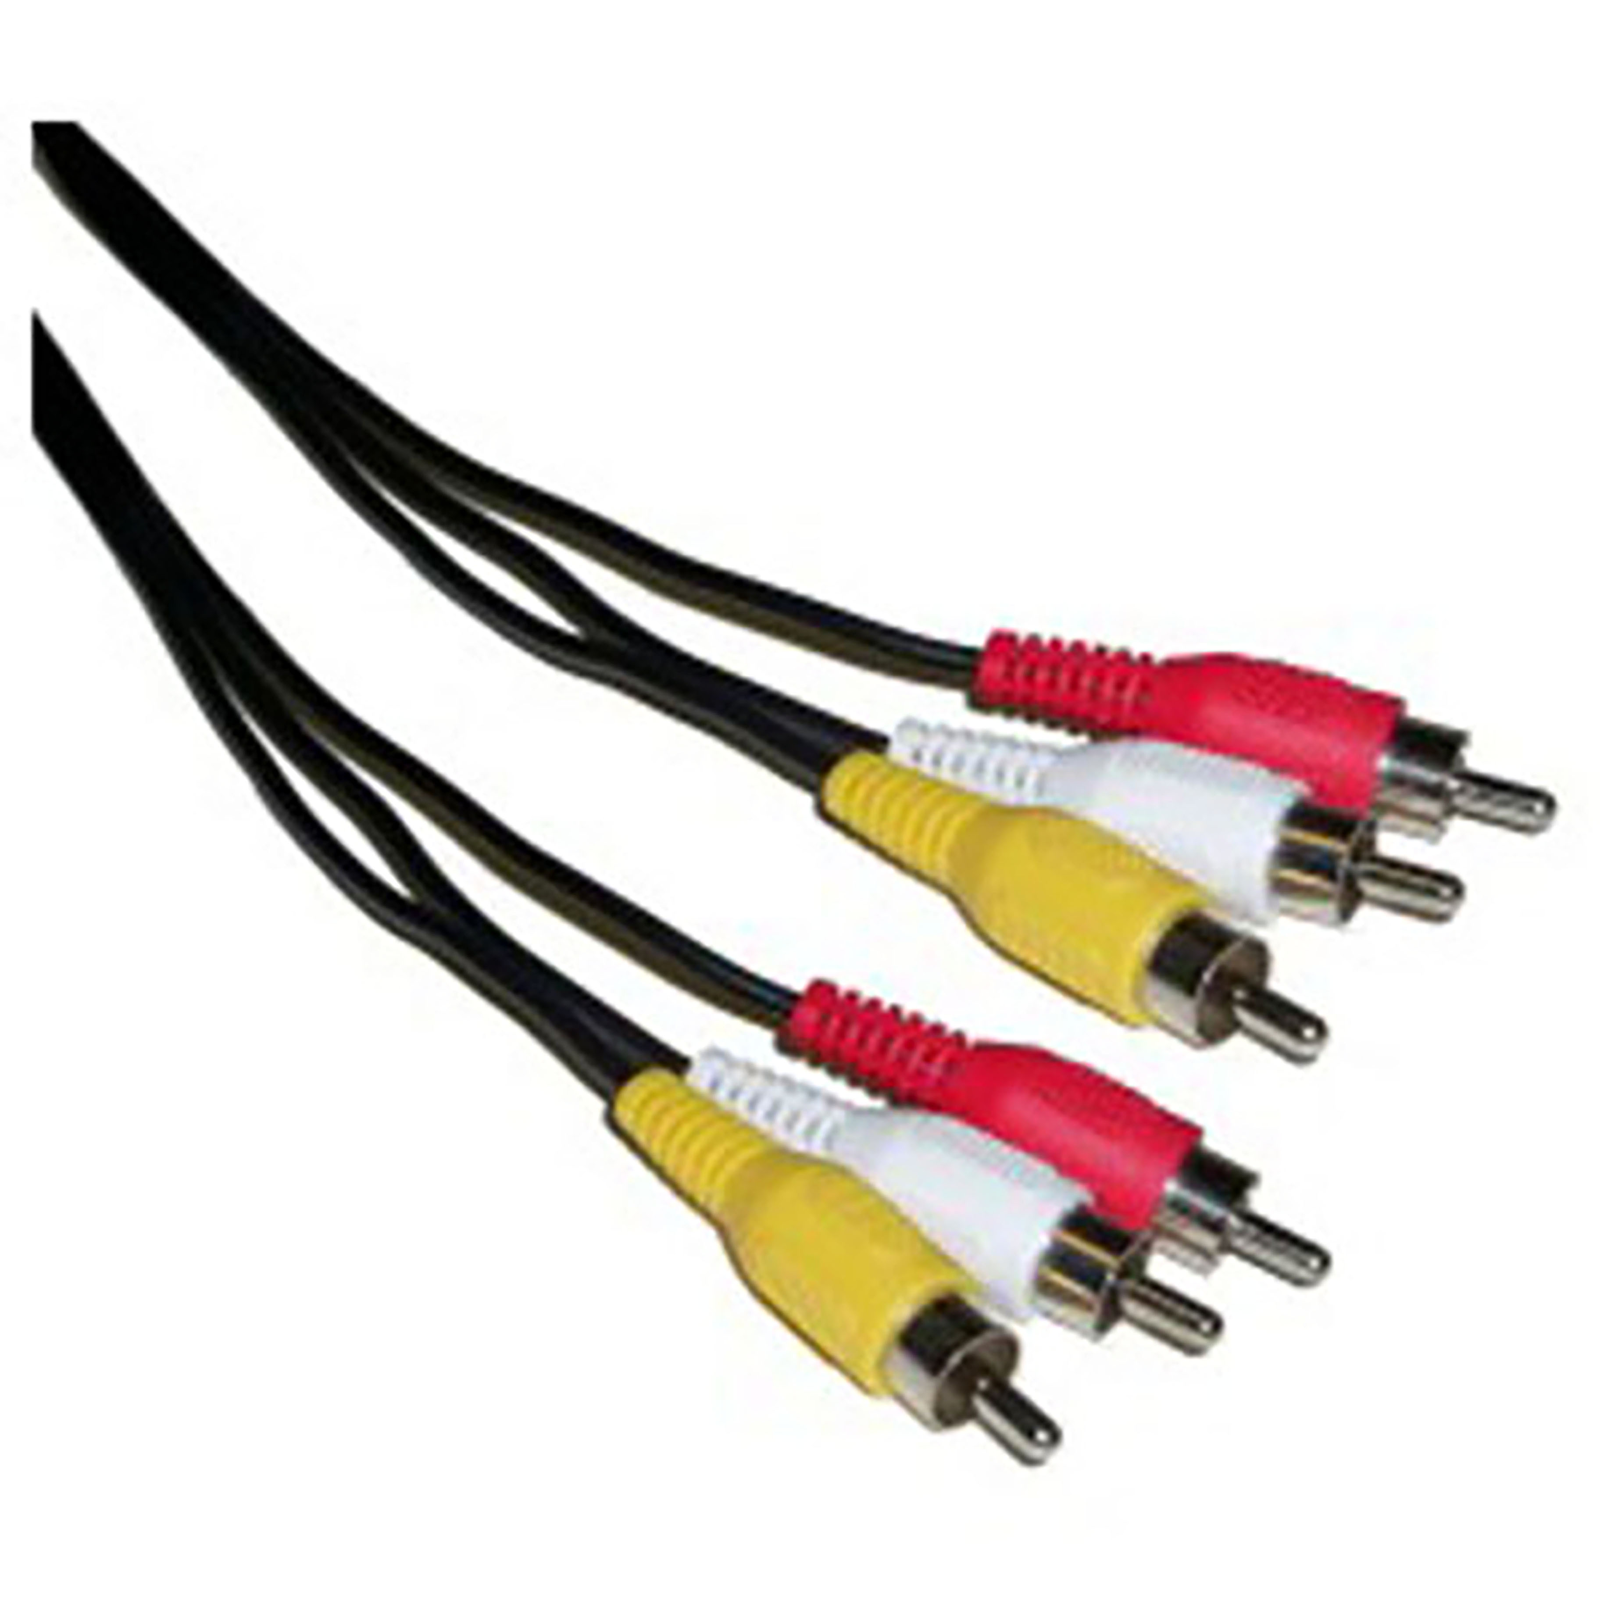 Stereo-Audio + Video Kabel 15m (3XRCA-M/M) - Cablematic